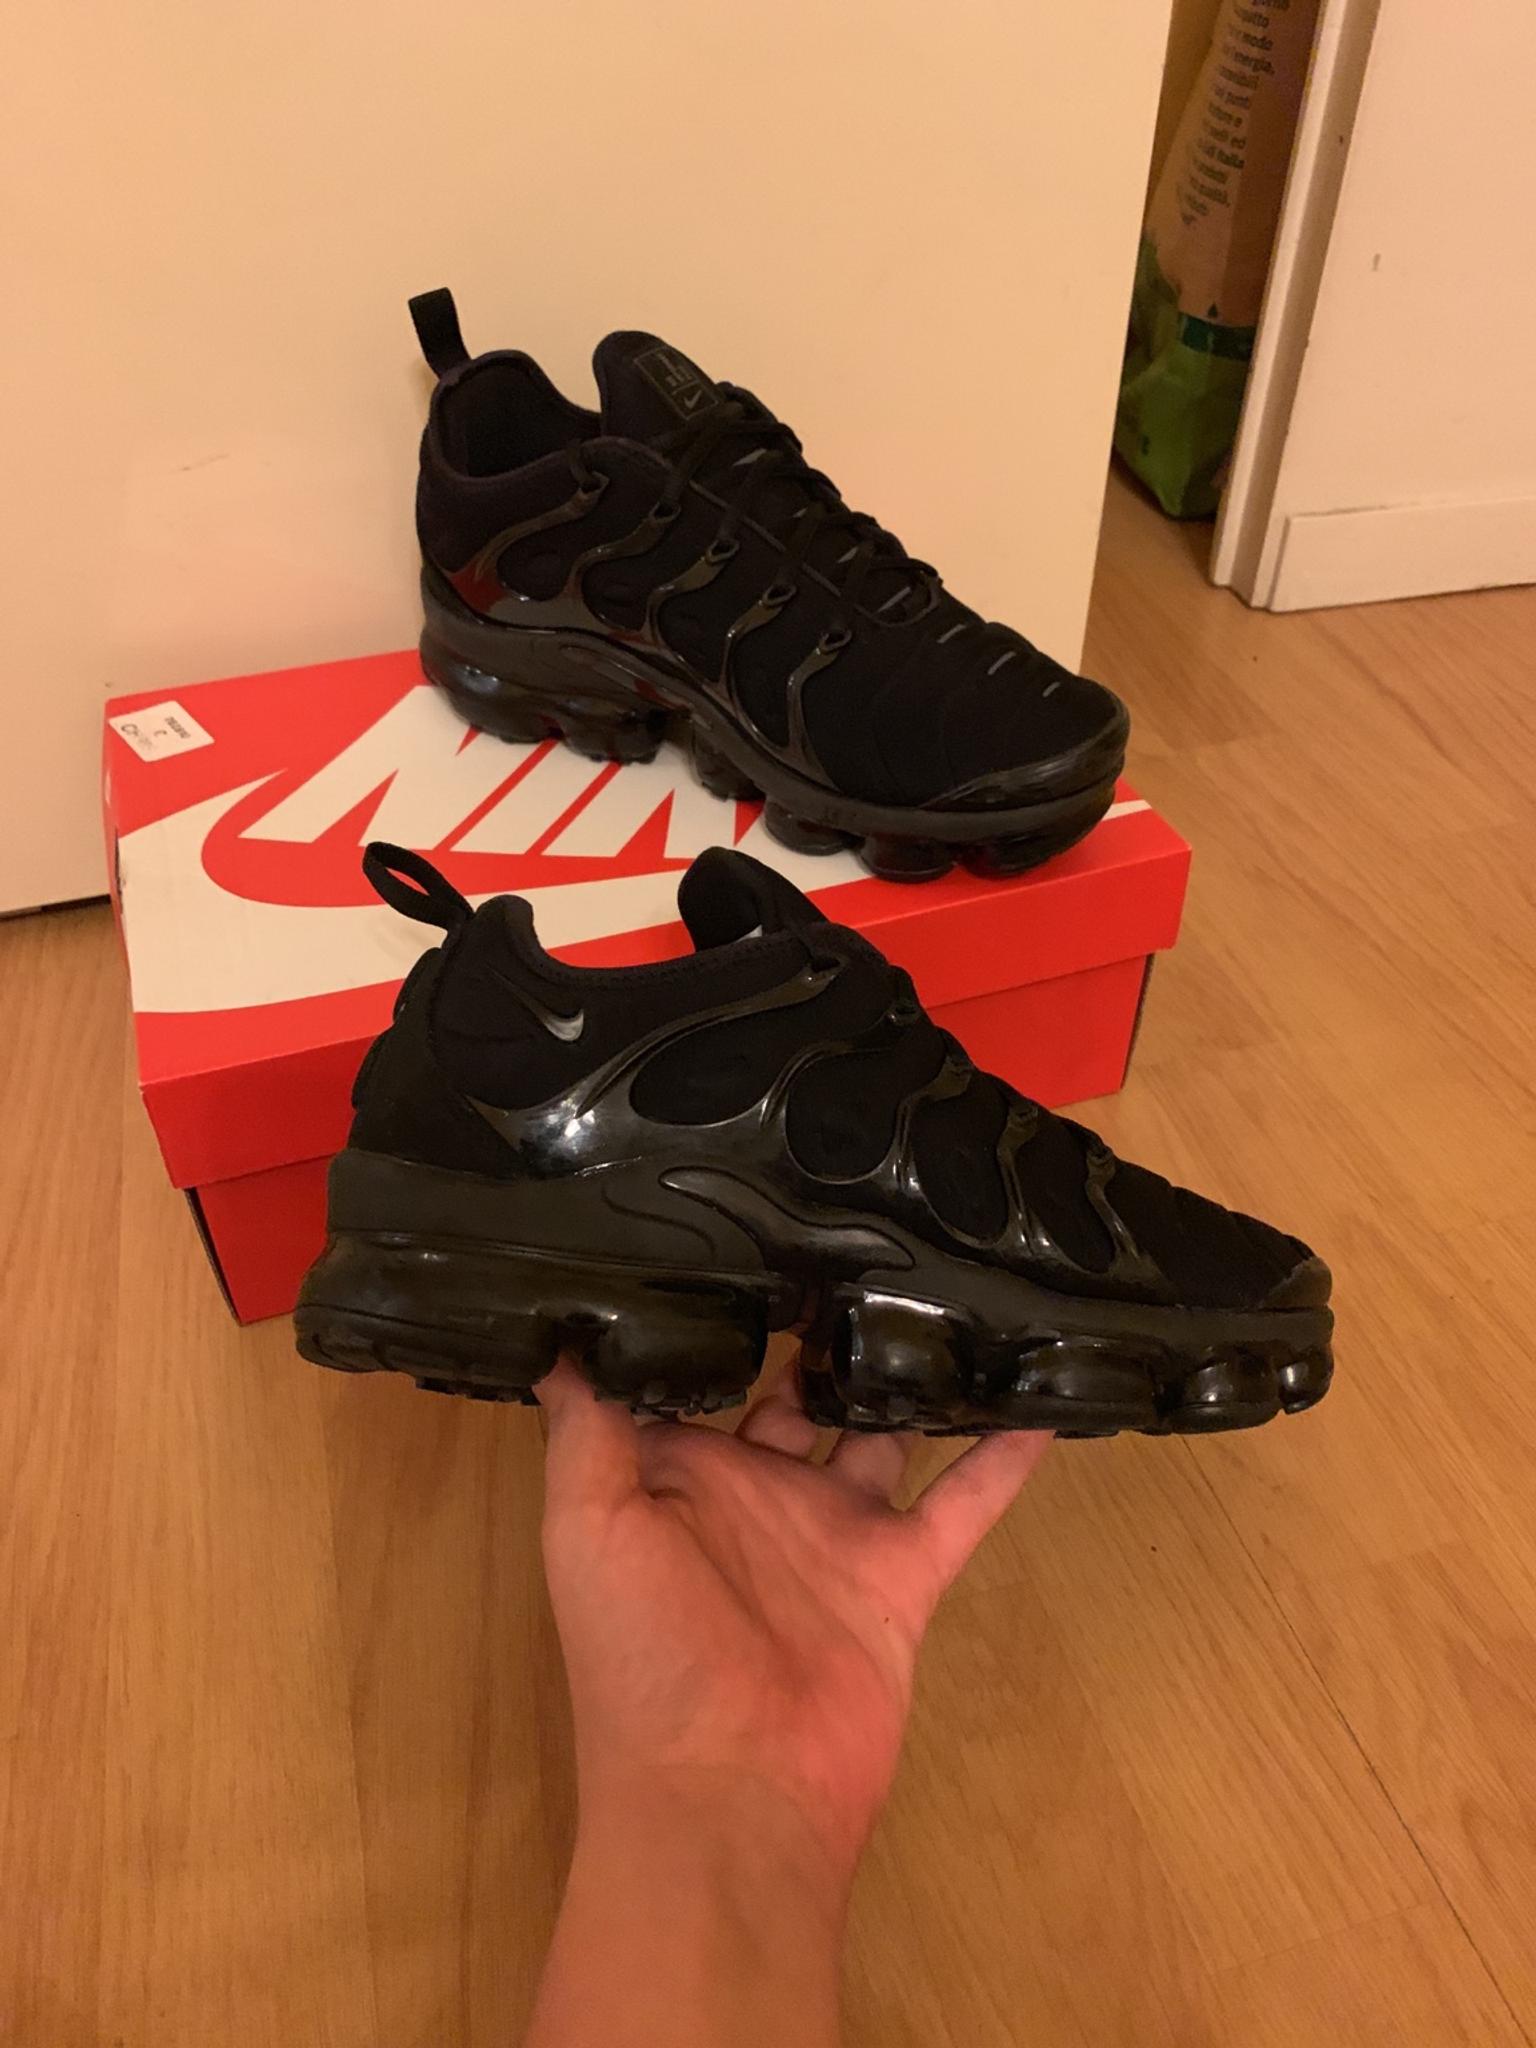 Nike vapormax plus nr 42 in 20134 Milano for €120.00 for sale | Shpock